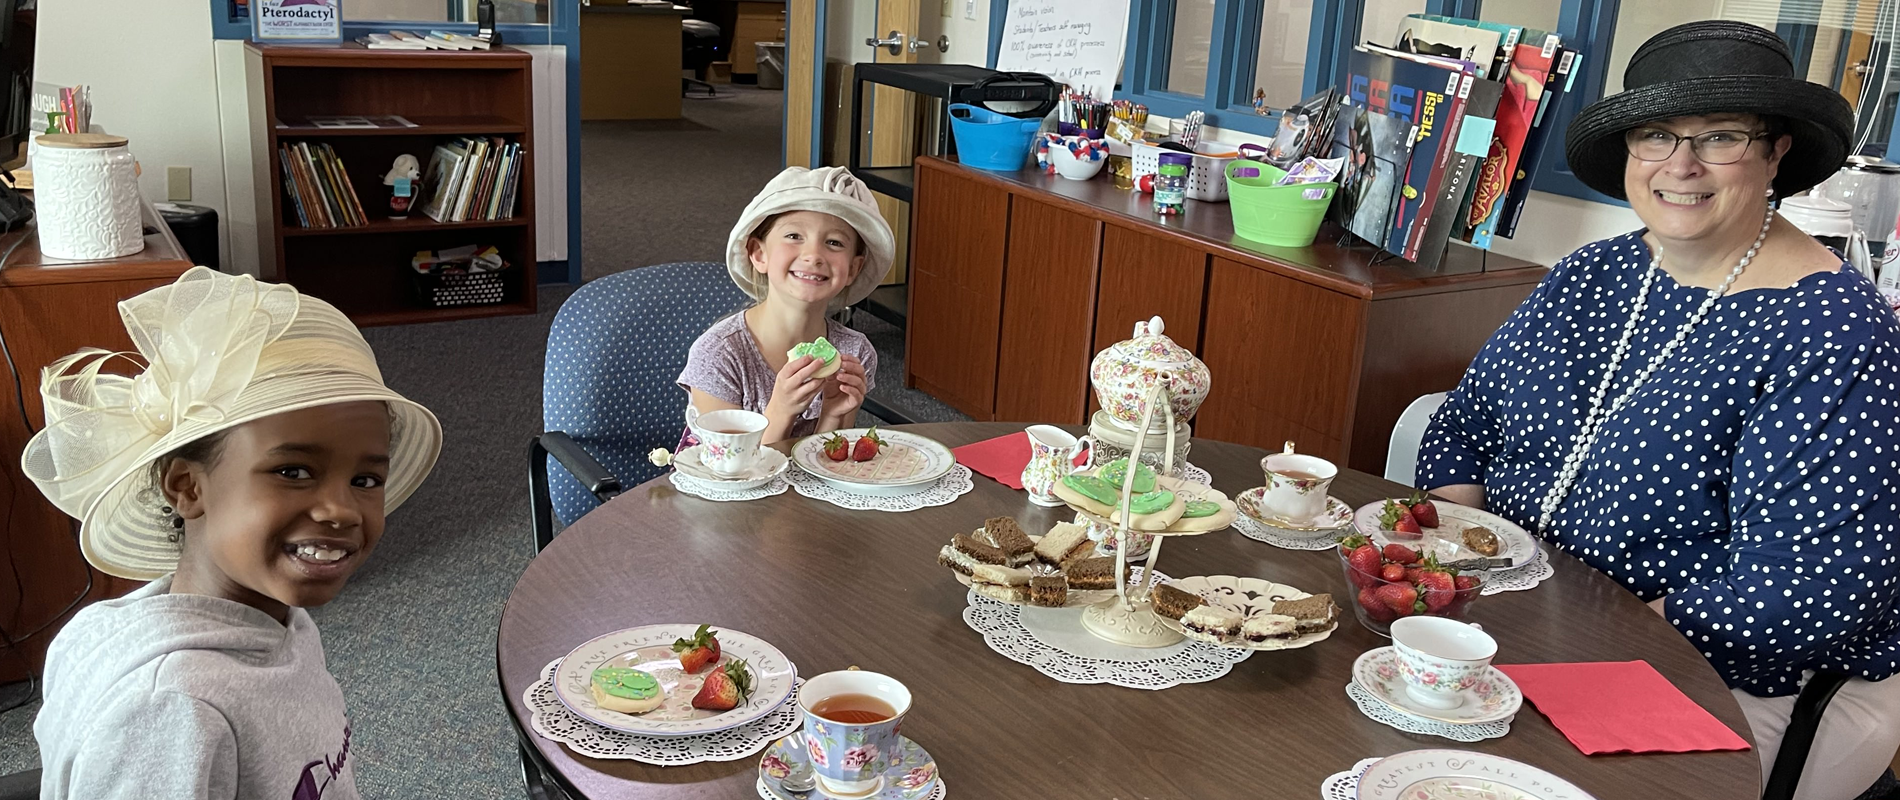 Principal Yates having a tea party with students